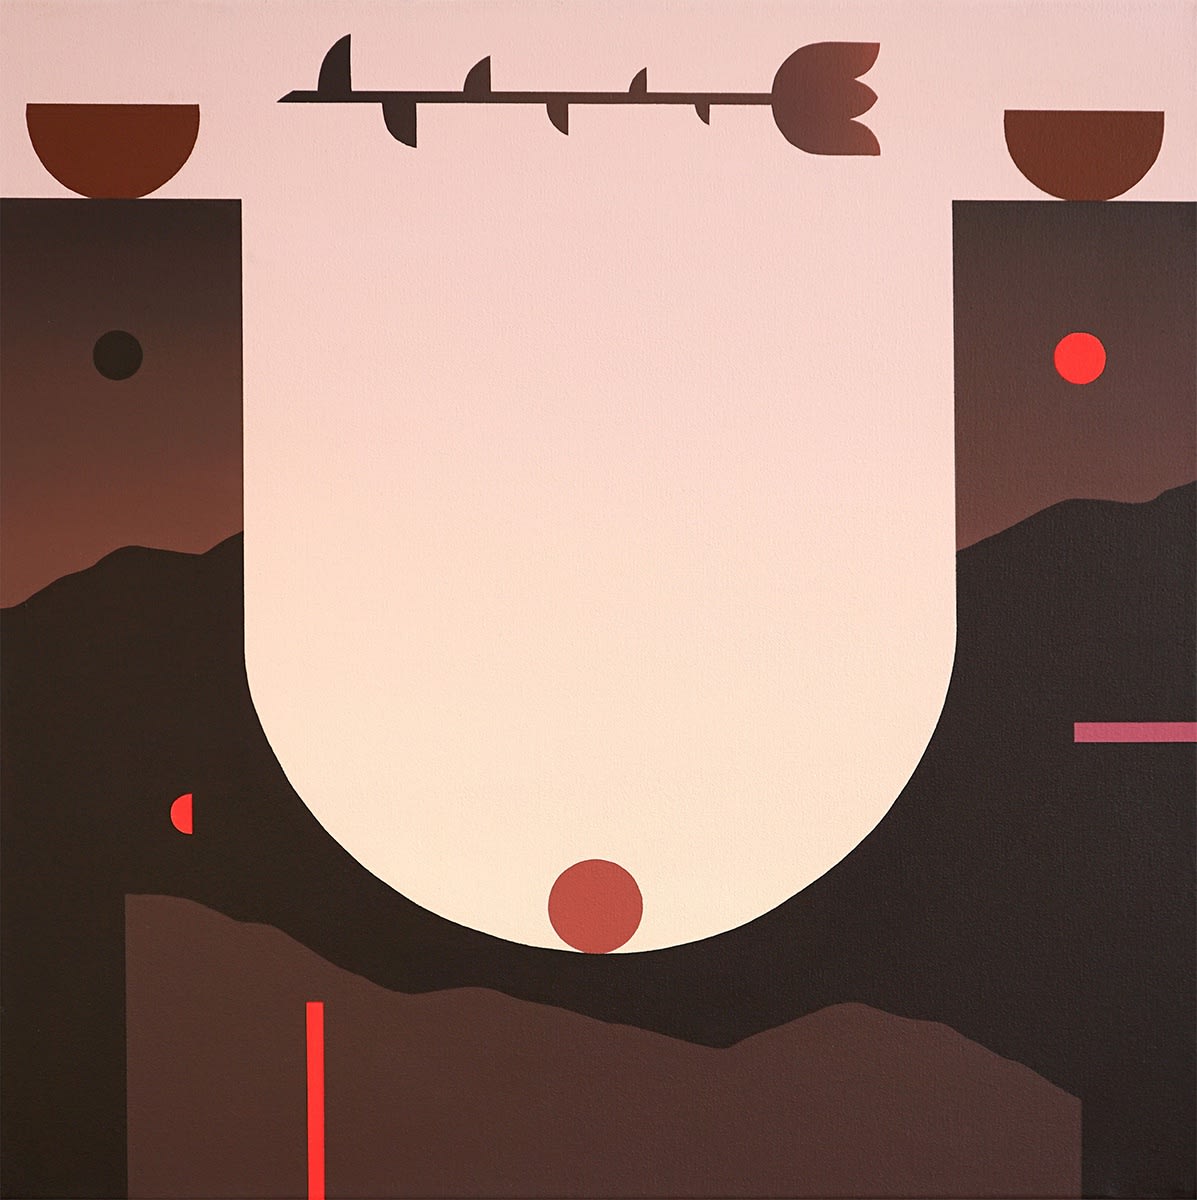 An image of Madeleine Tonzi Held, 2023. The painting is an almost abstract desert landscape, where two large dark cliffs meet in a U formation, showing a window of pink sky. A rose floats above the U, the painting punctuated with small burgundy lines or circles. 